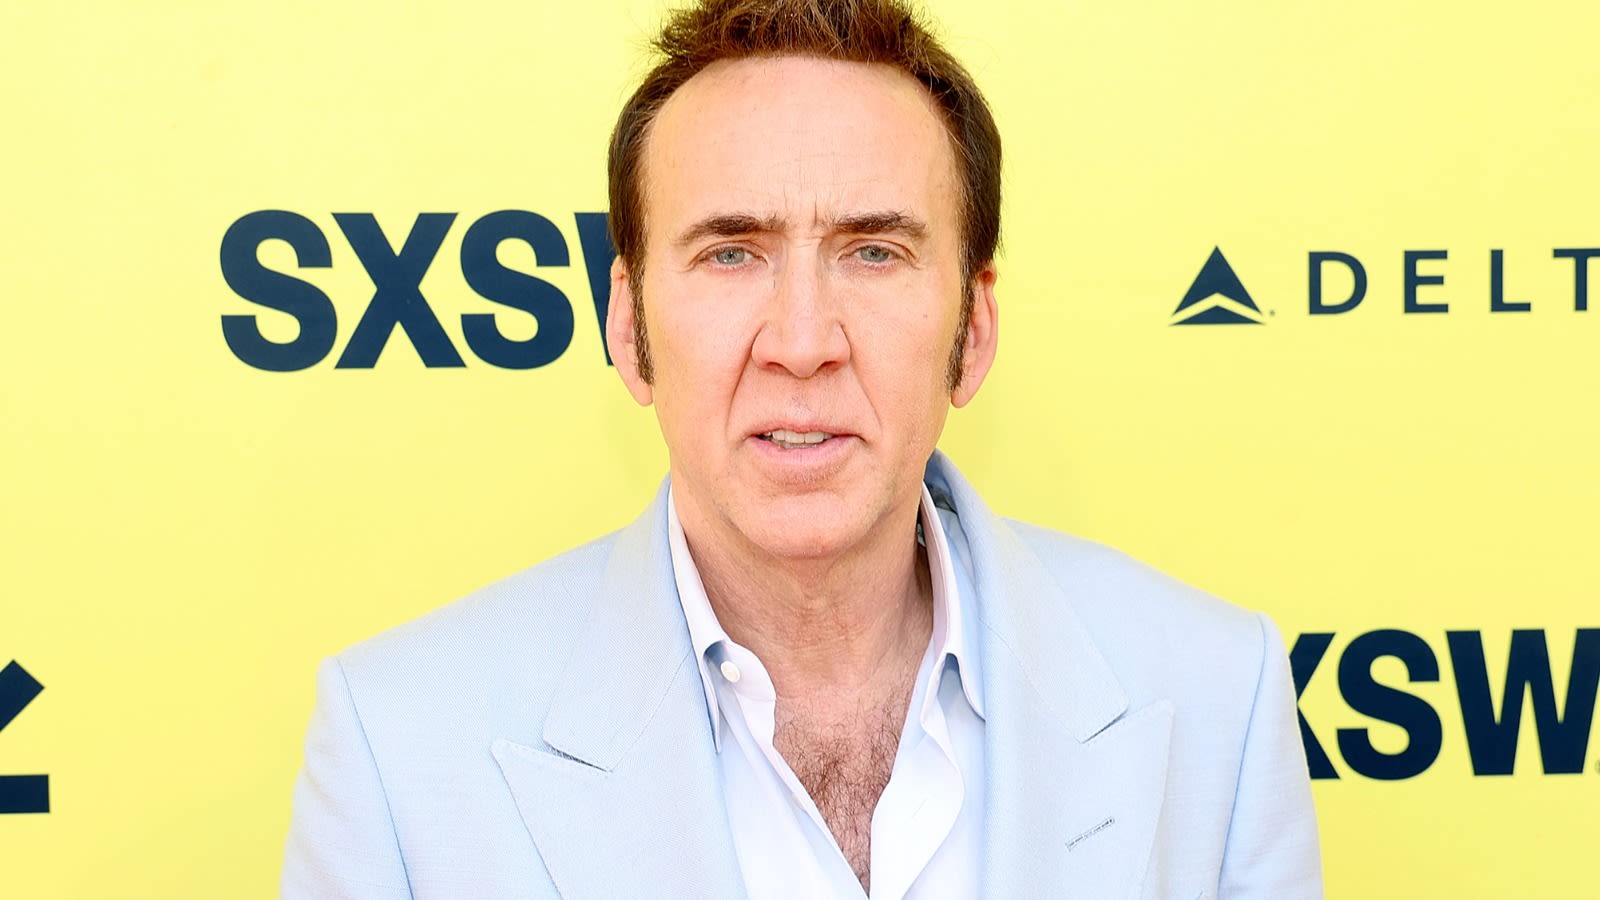 Nicolas Cage Appears In This Viral Image Of Two Girls With Pizza (If You Do It Right) - Looper